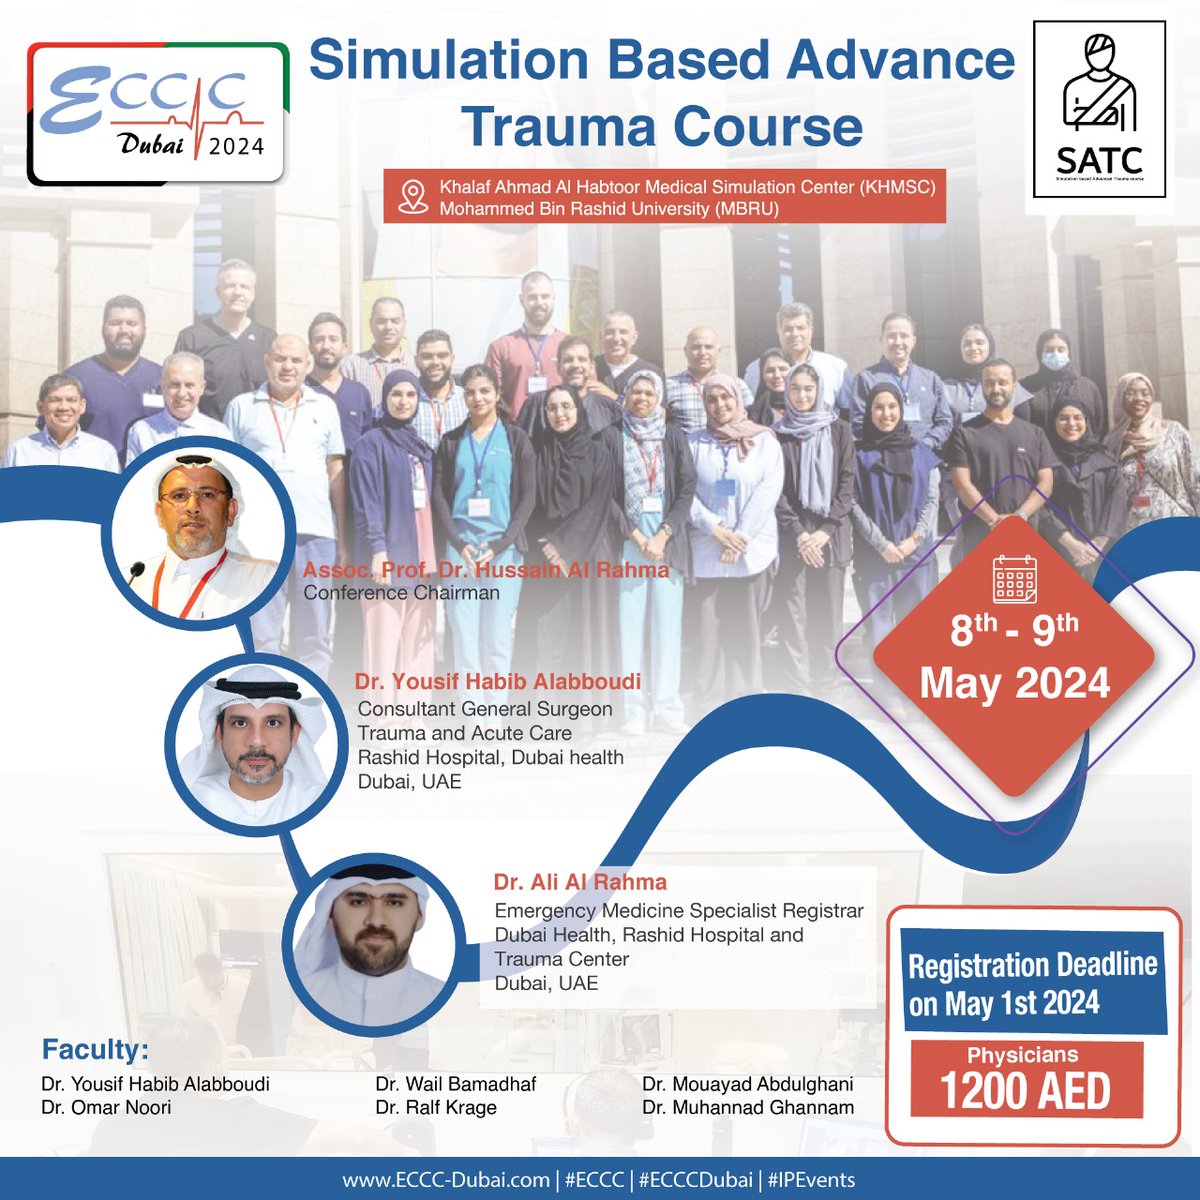 Hurry! Tomorrow, May 1st, 2024, is the deadline to register for the Pre-Conference Simulation-Based Advanced Trauma Course at Emirates Critical Care Conference 2024!

Register now @ bit.ly/ECCCSAT

#ECCC #ECCCDUBAI #ECCC2024 #EmiratesCriticalCare